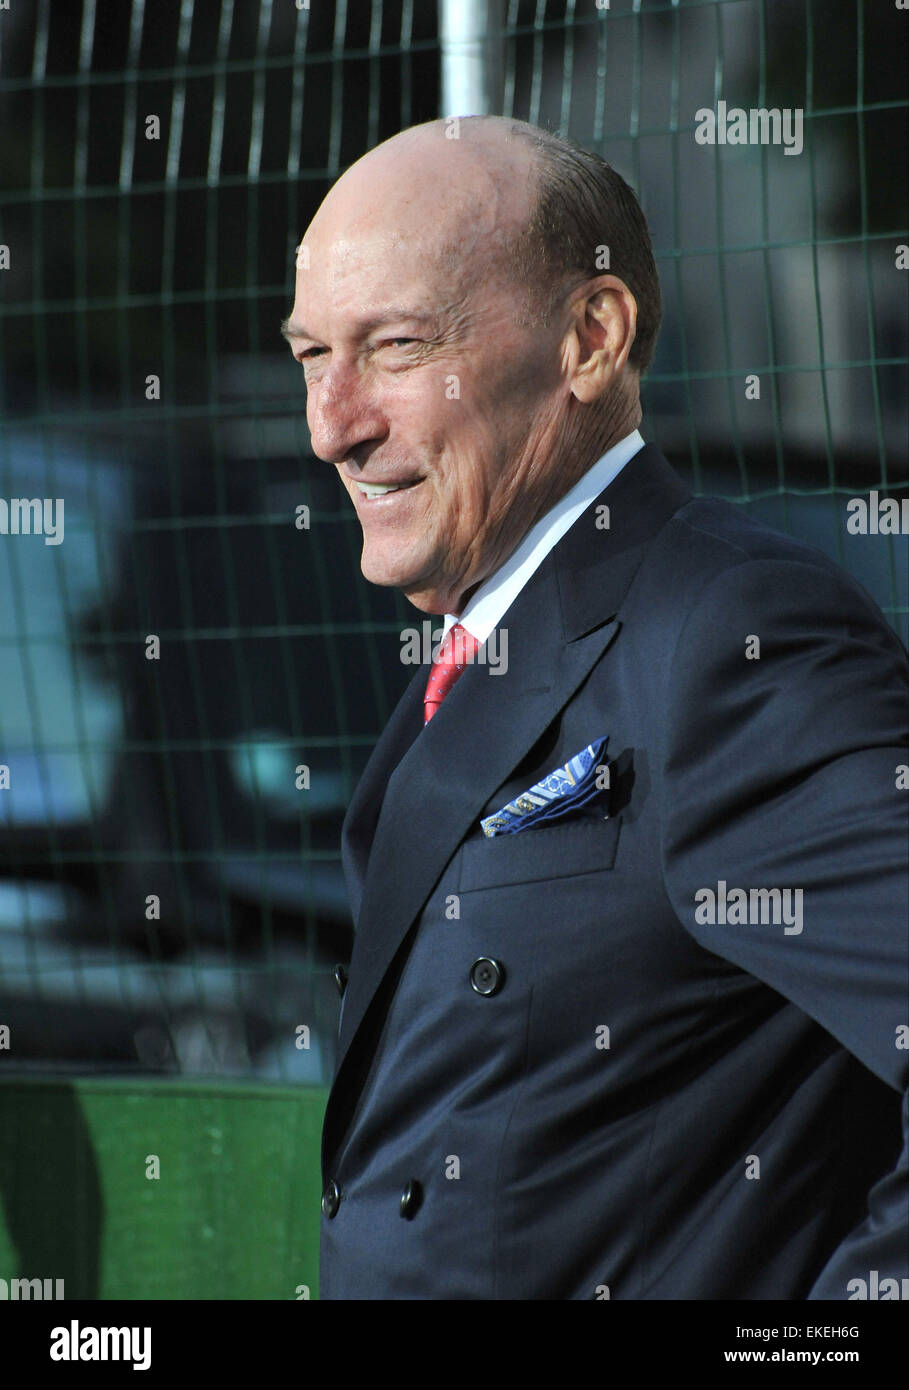 LOS ANGELES, CA - SEPTEMBER 19, 2012: Ed Lauter at the premiere of his movie 'Trouble With The Curve' at the Mann Village Theatre, Westwood. Stock Photo